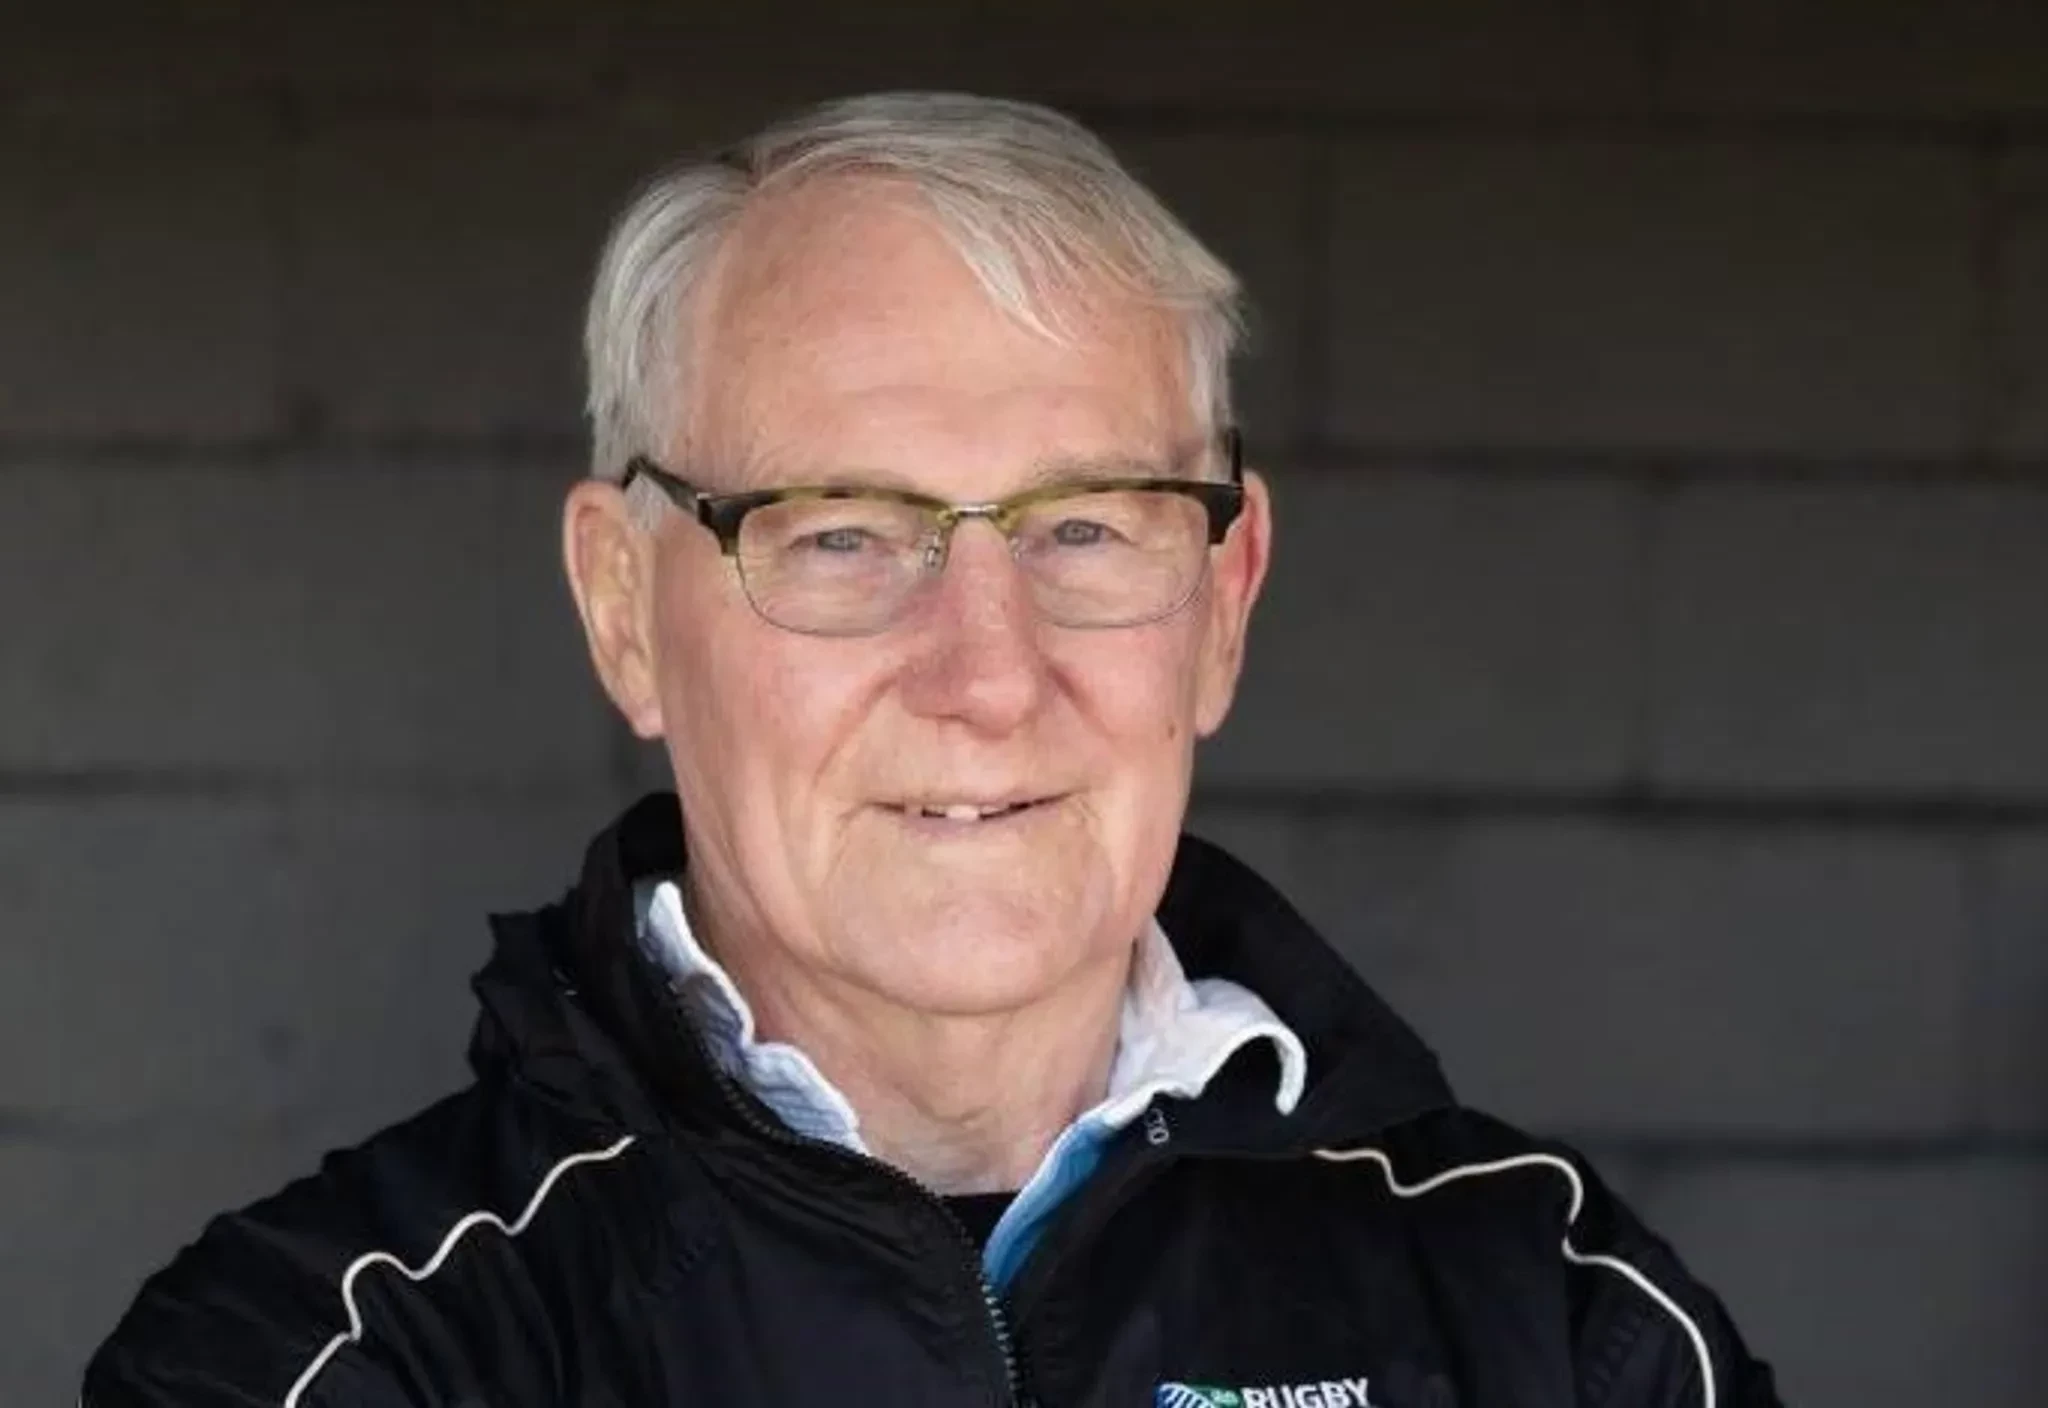 World Rugby has paid tribute to Lee Smith ©World Rugby